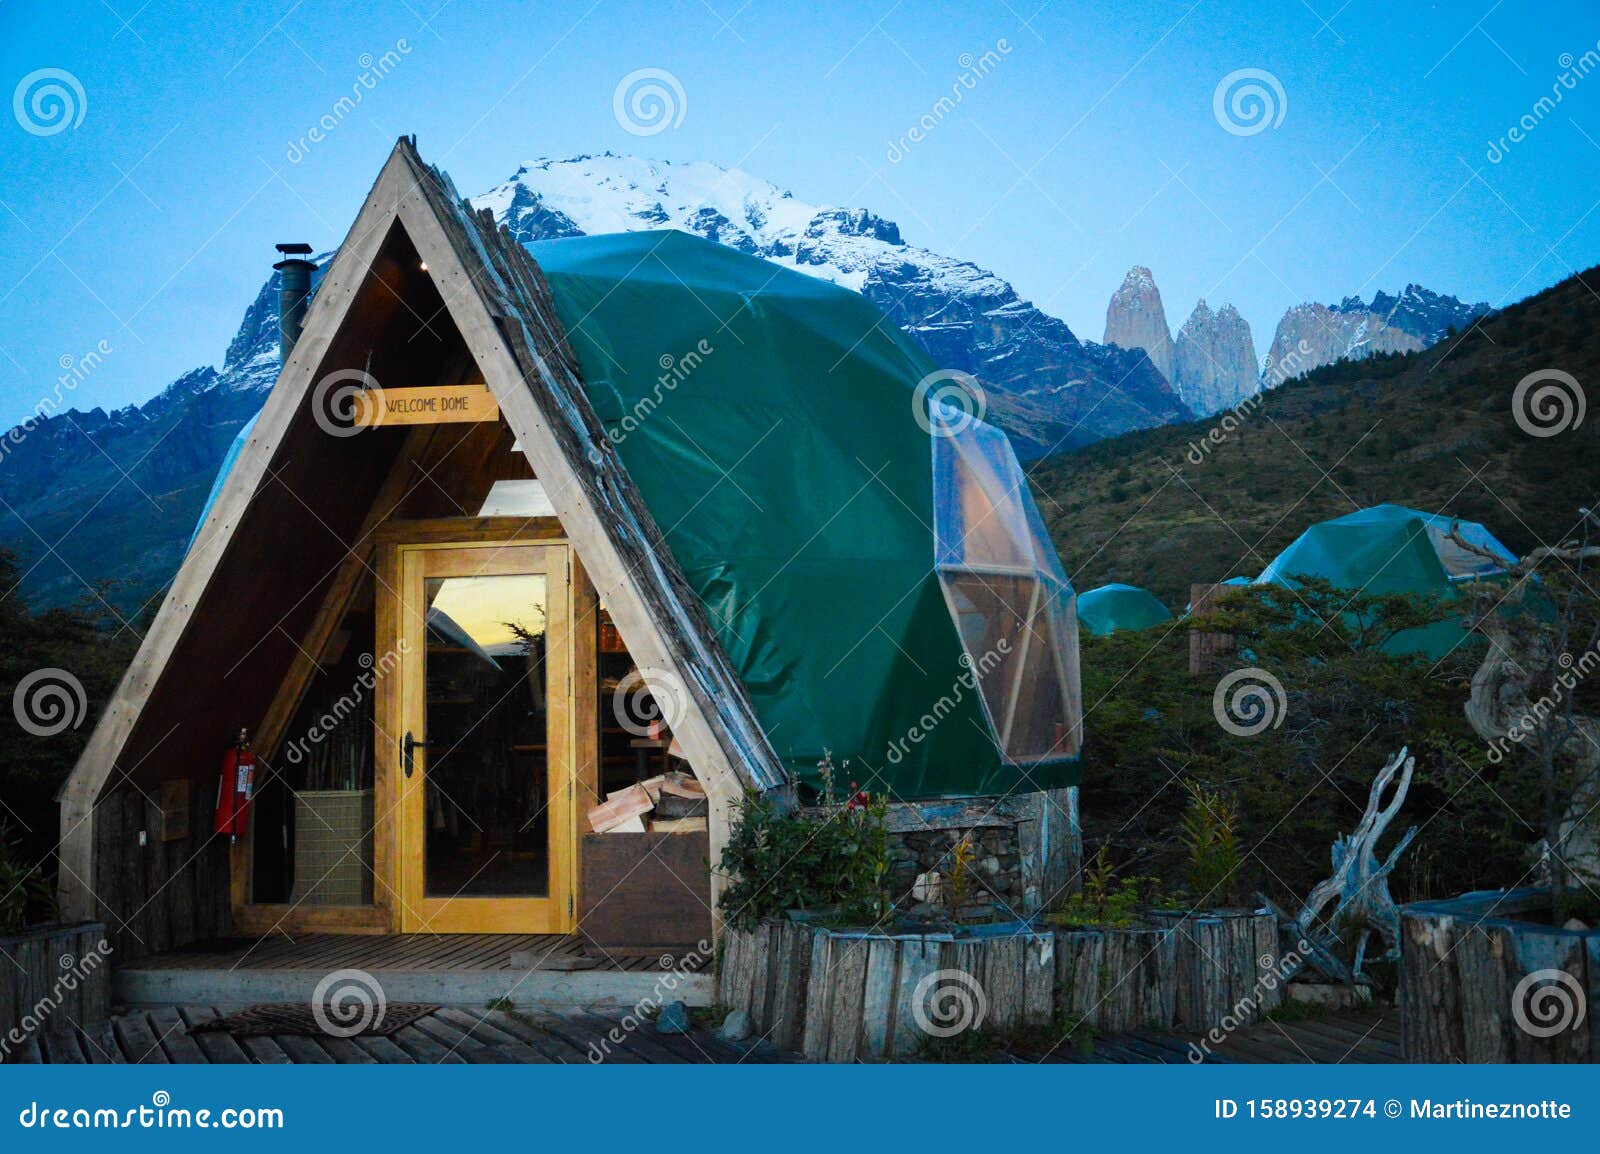 reception of the dome glamping camp close to the torres del paine national park